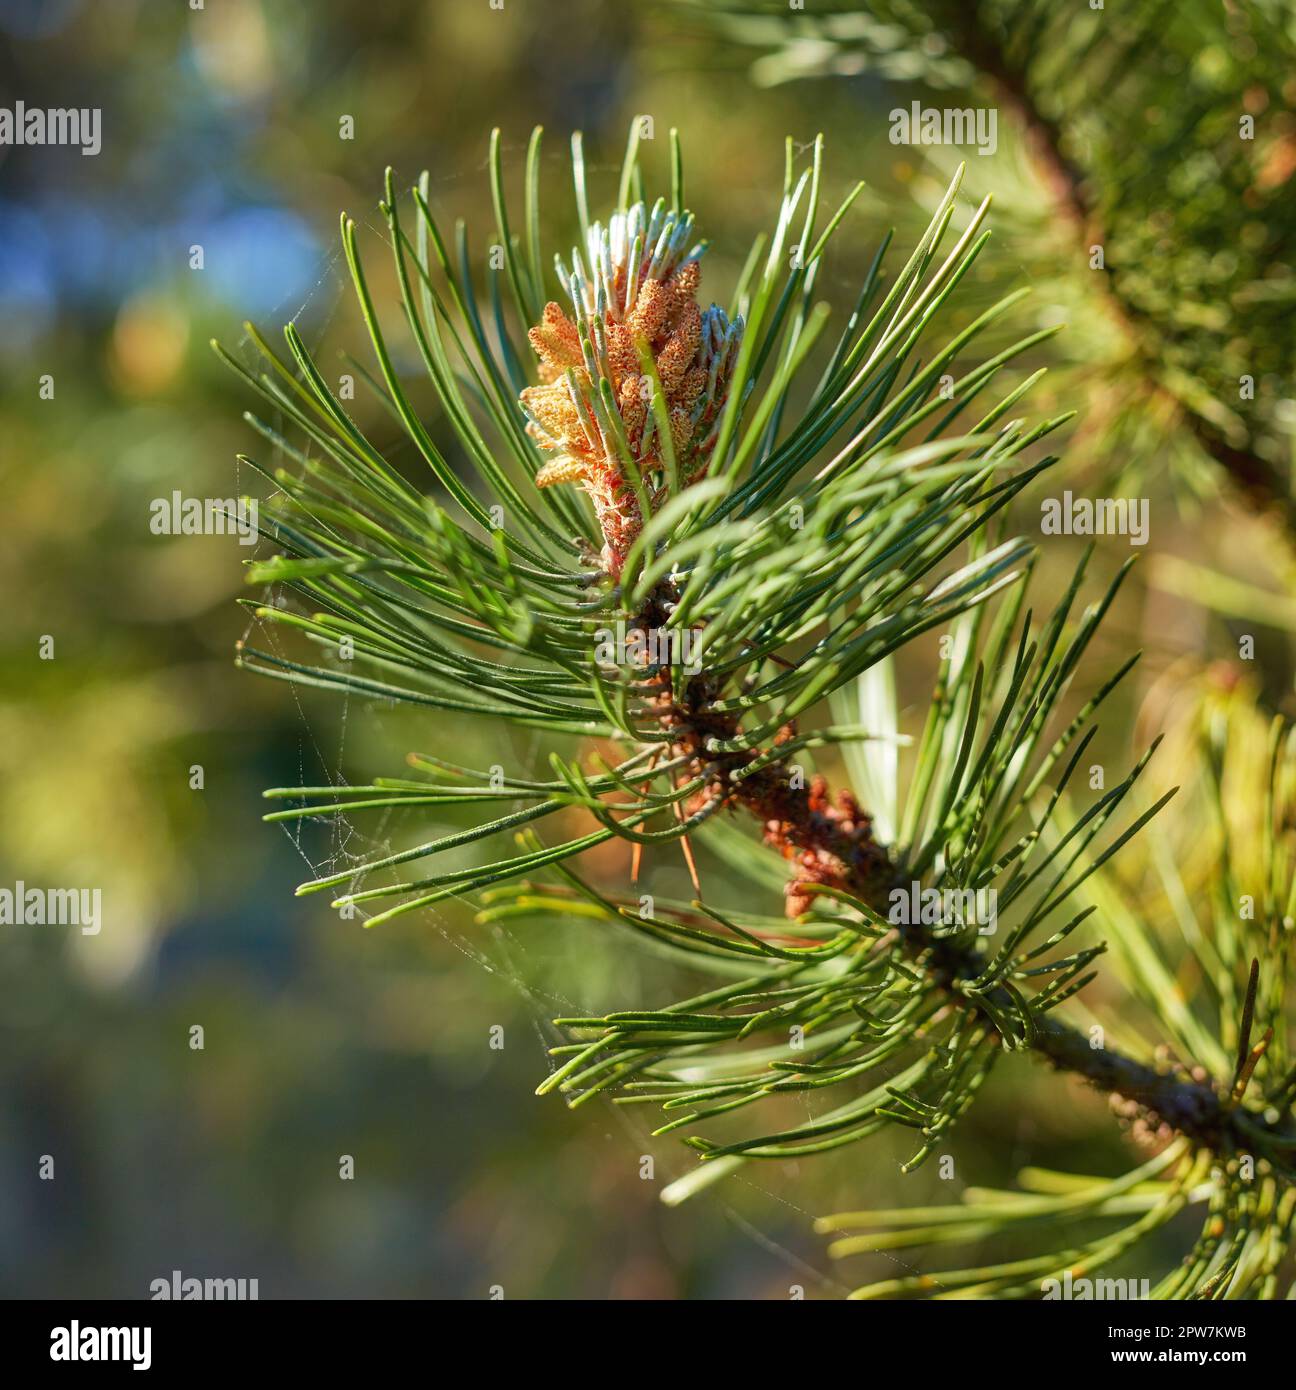 Scotch pine Pinus sylvestris male pollen flowers on a tree growing in a evergreen coniferous forest in Denmark. Flowers growing on a pine tree branch. Stock Photo